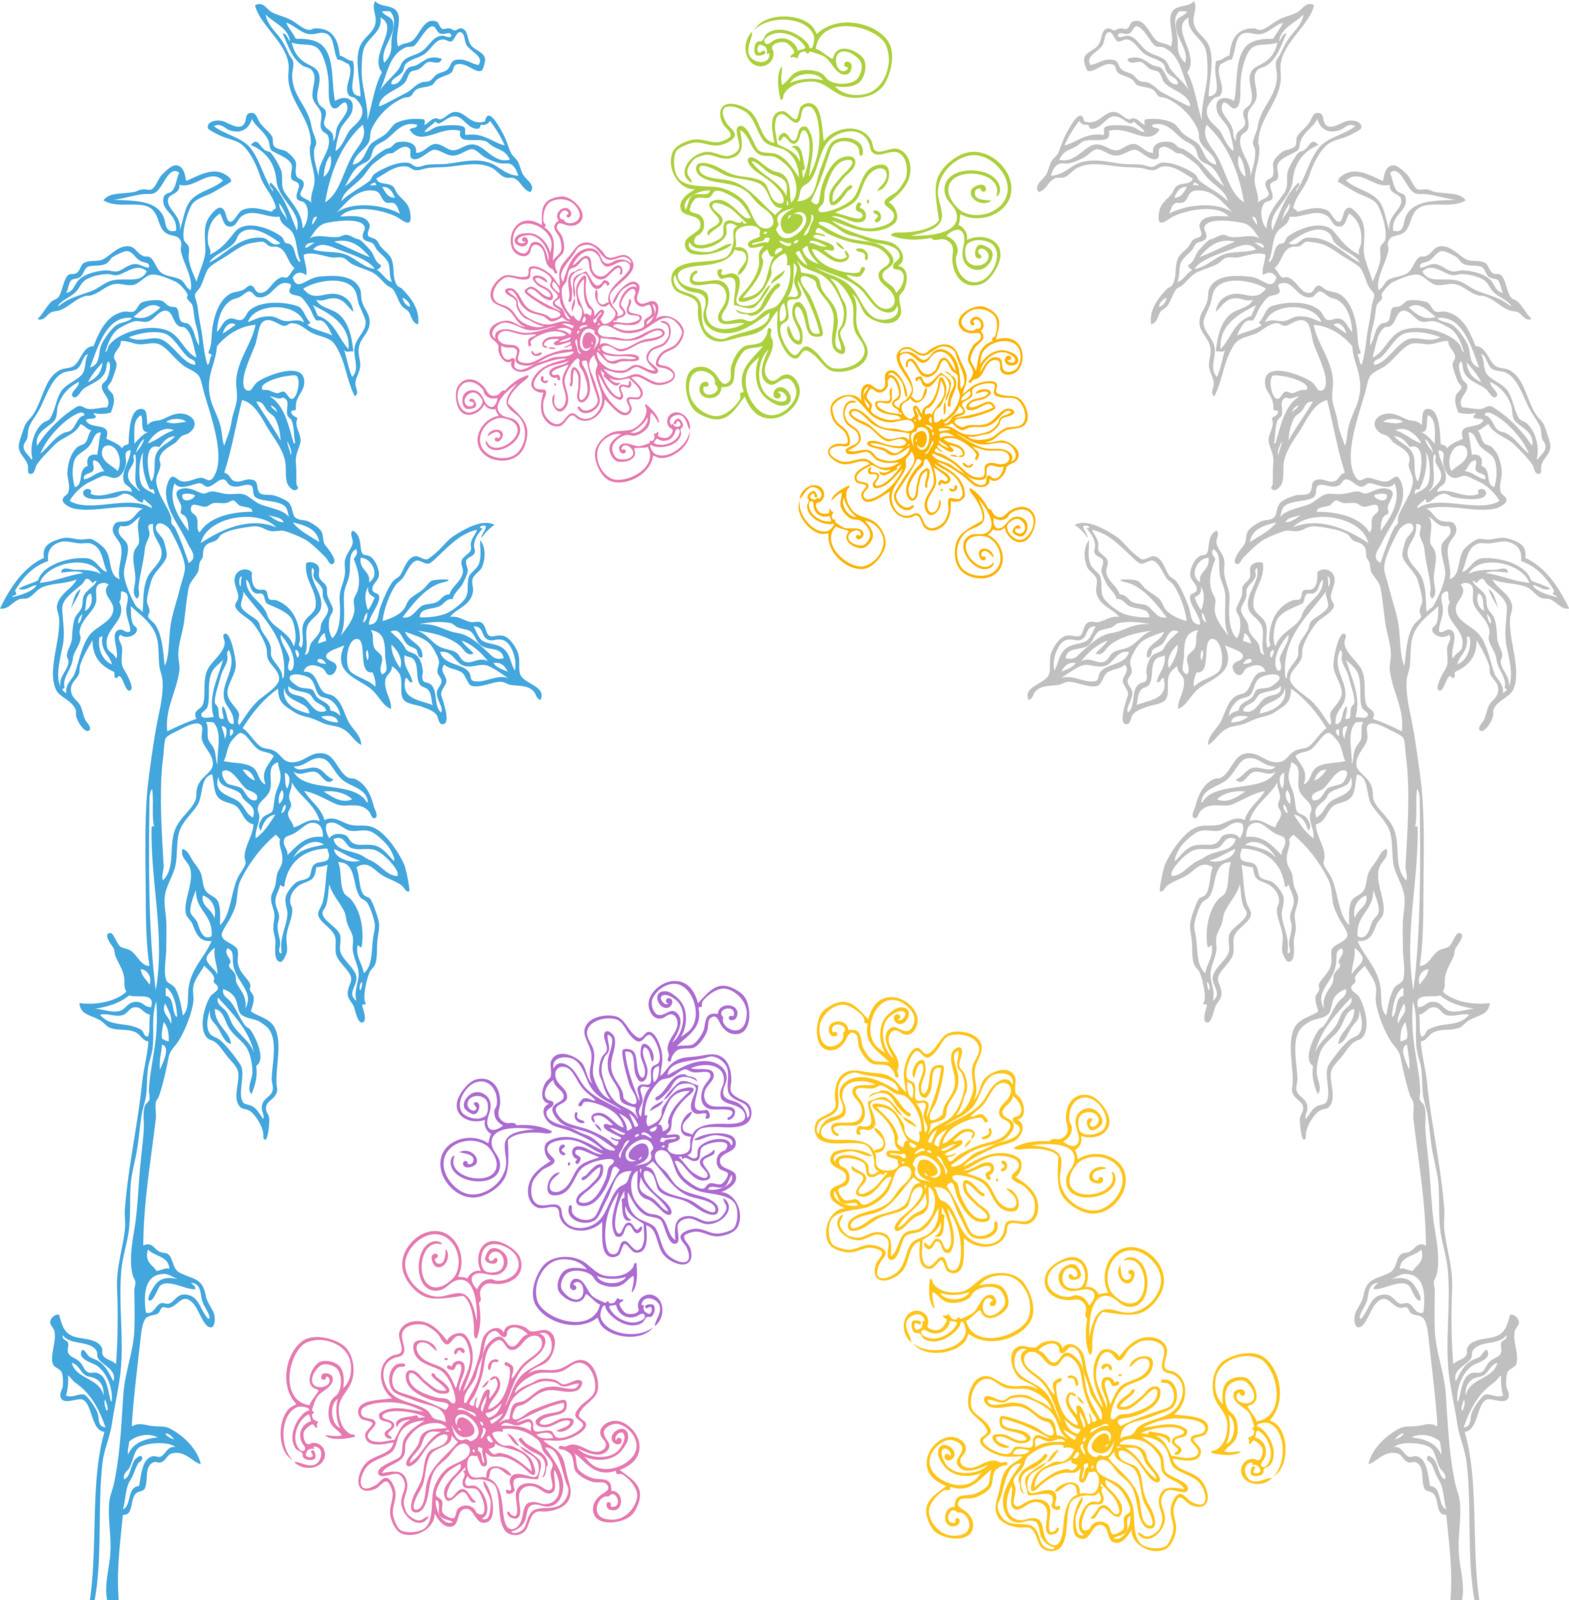 An image of hand drawn plant design elements.